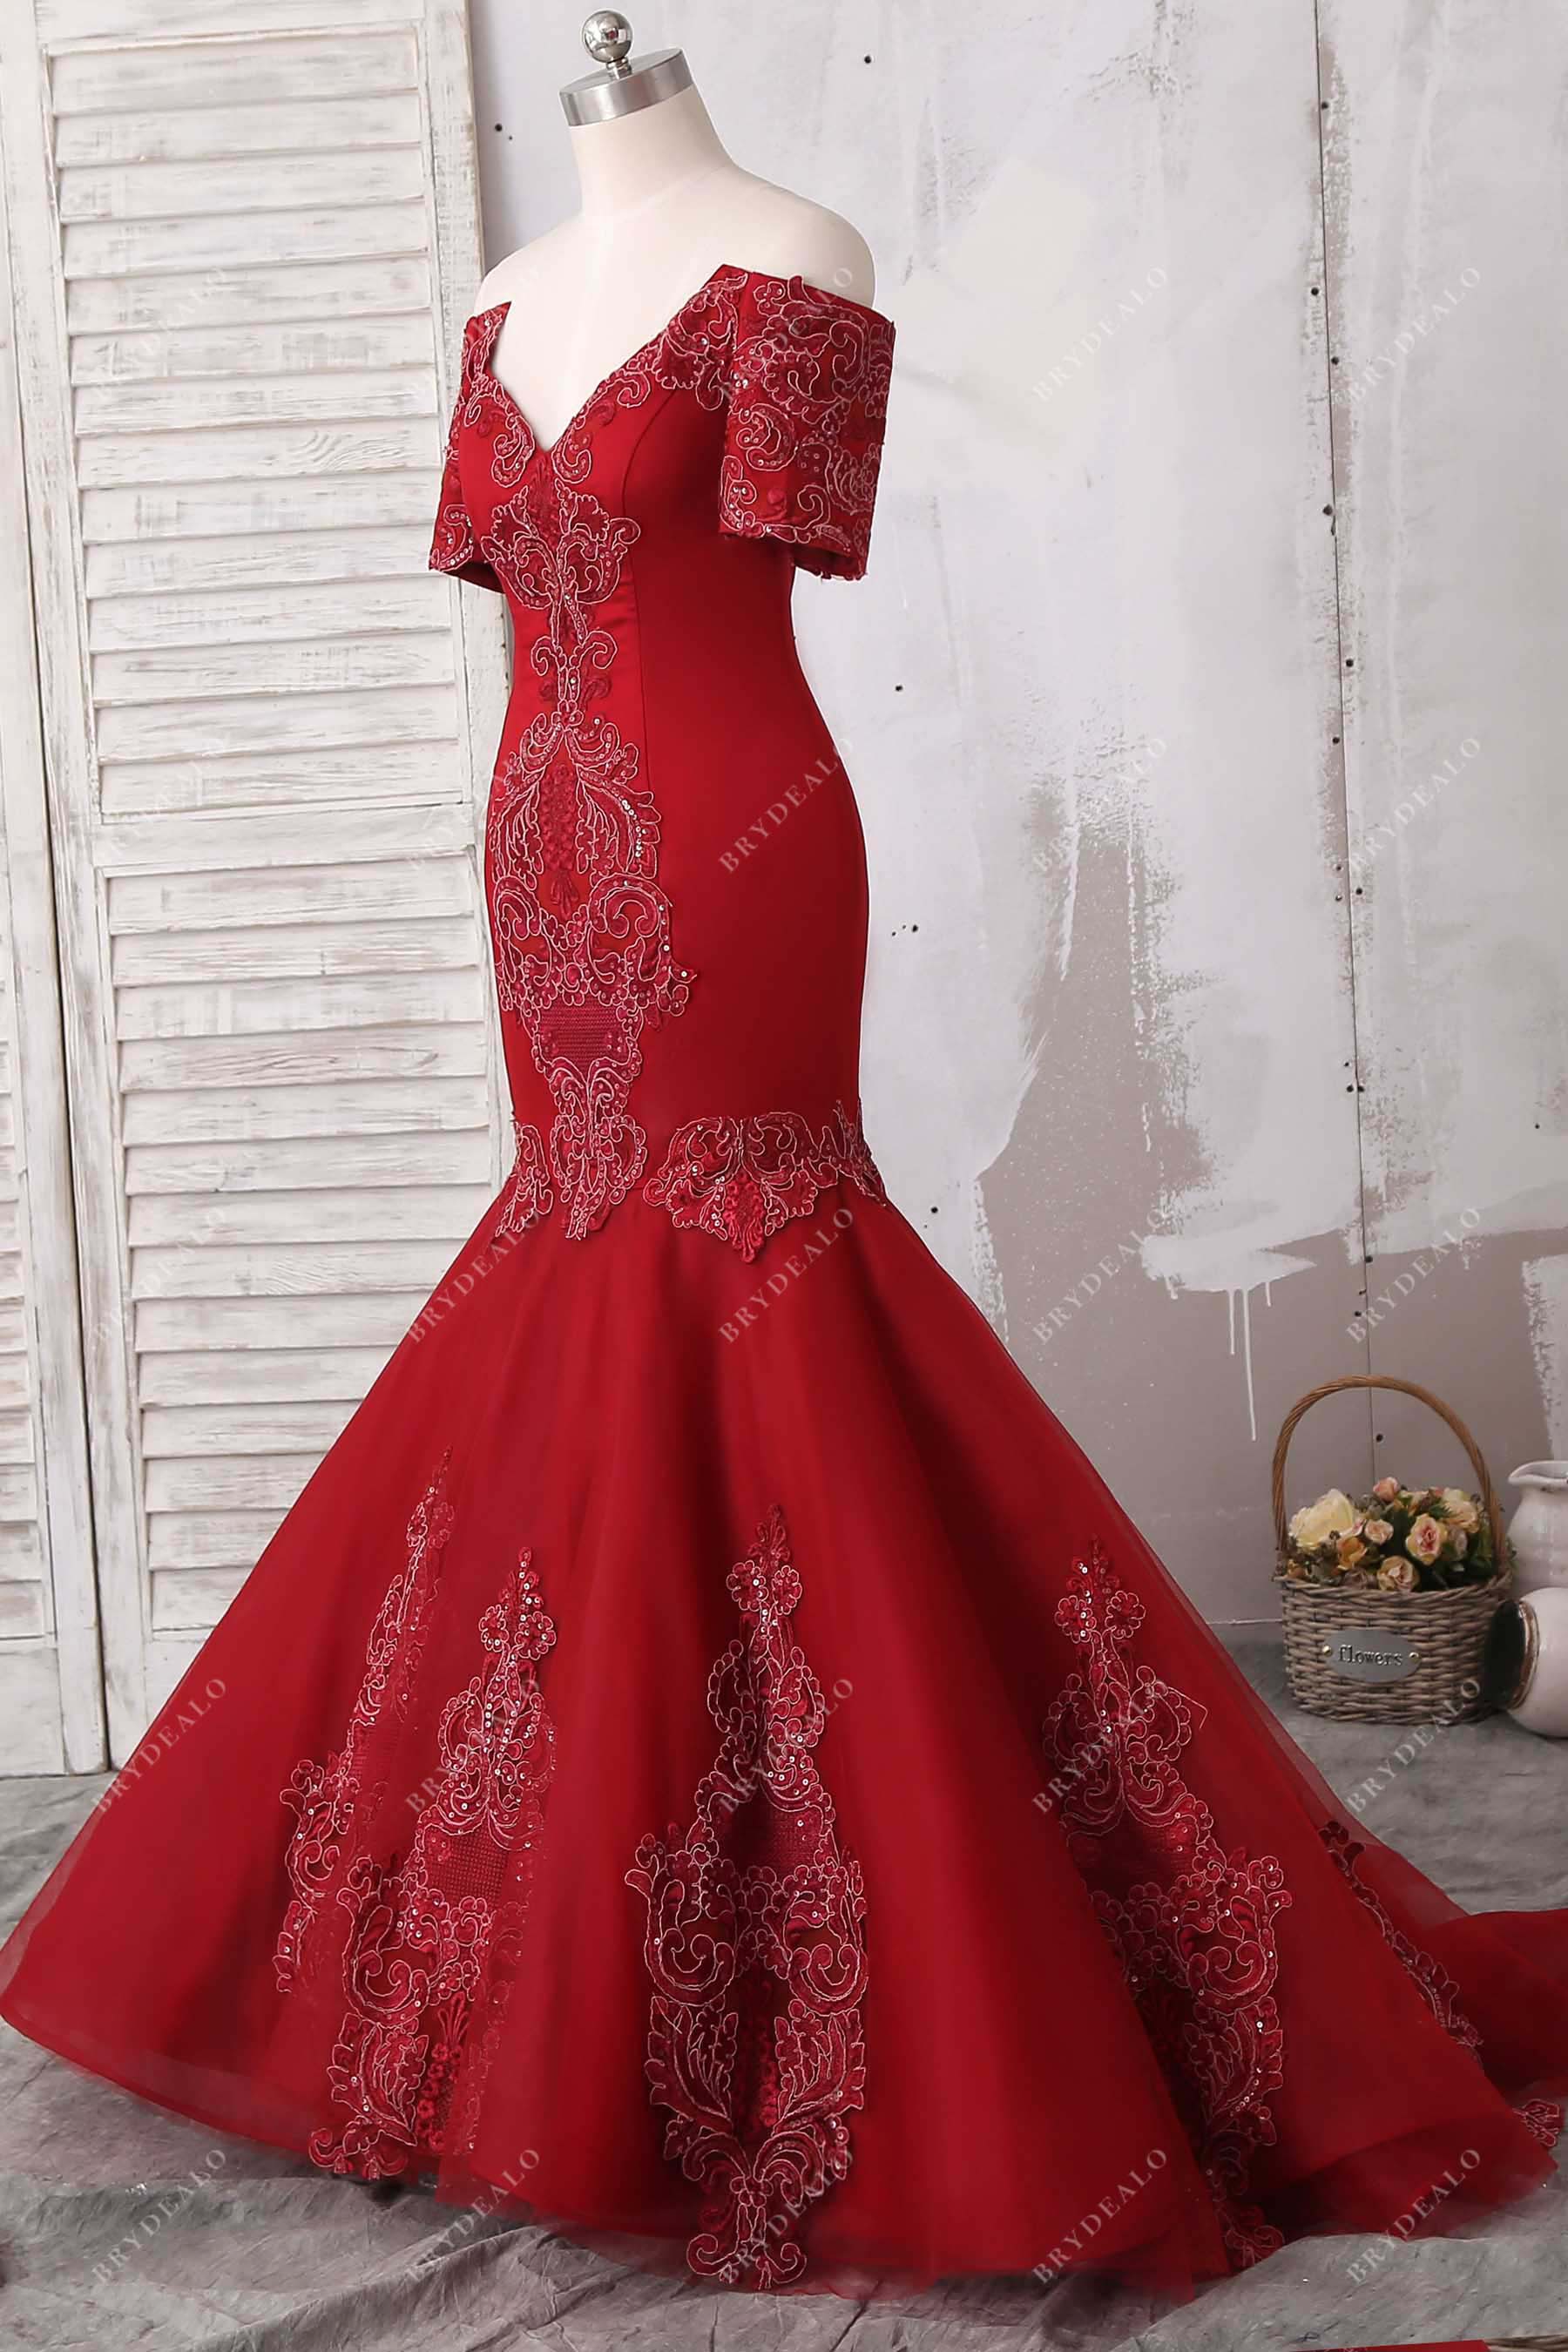 Cardi B's Red Lace Gown Rolls Birthday And A Valentine's Day Look Into One